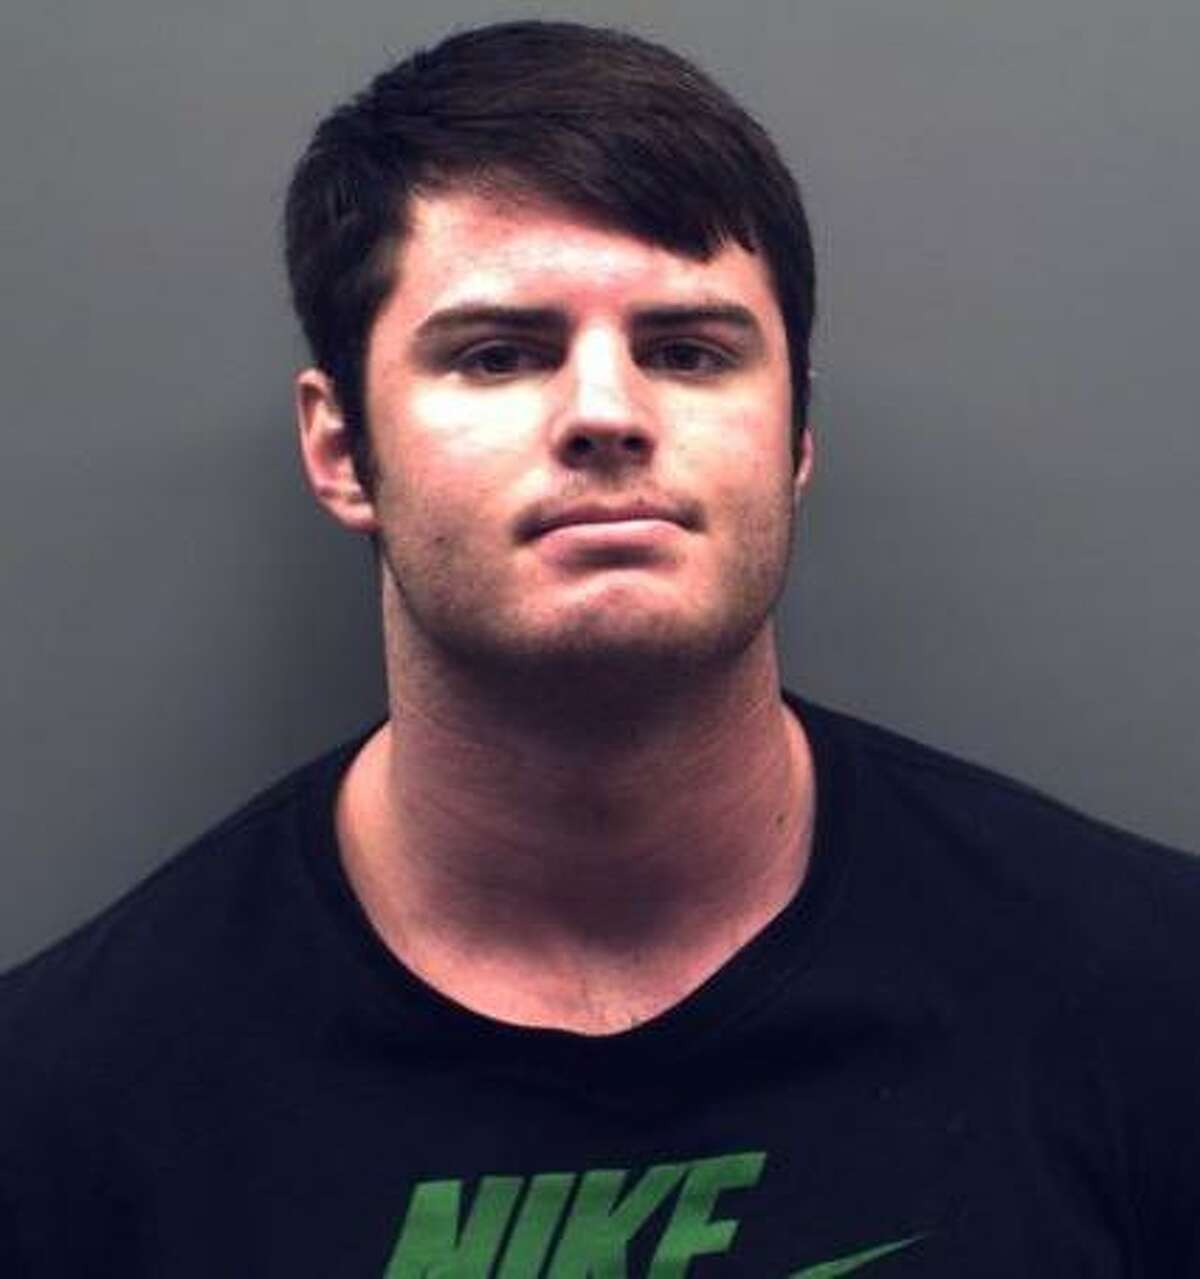 Mark Howerton, 22, was arrested in Tyler and charged with the possession of a controlled substance and delivering marijuana on Feb. 8, 2015.